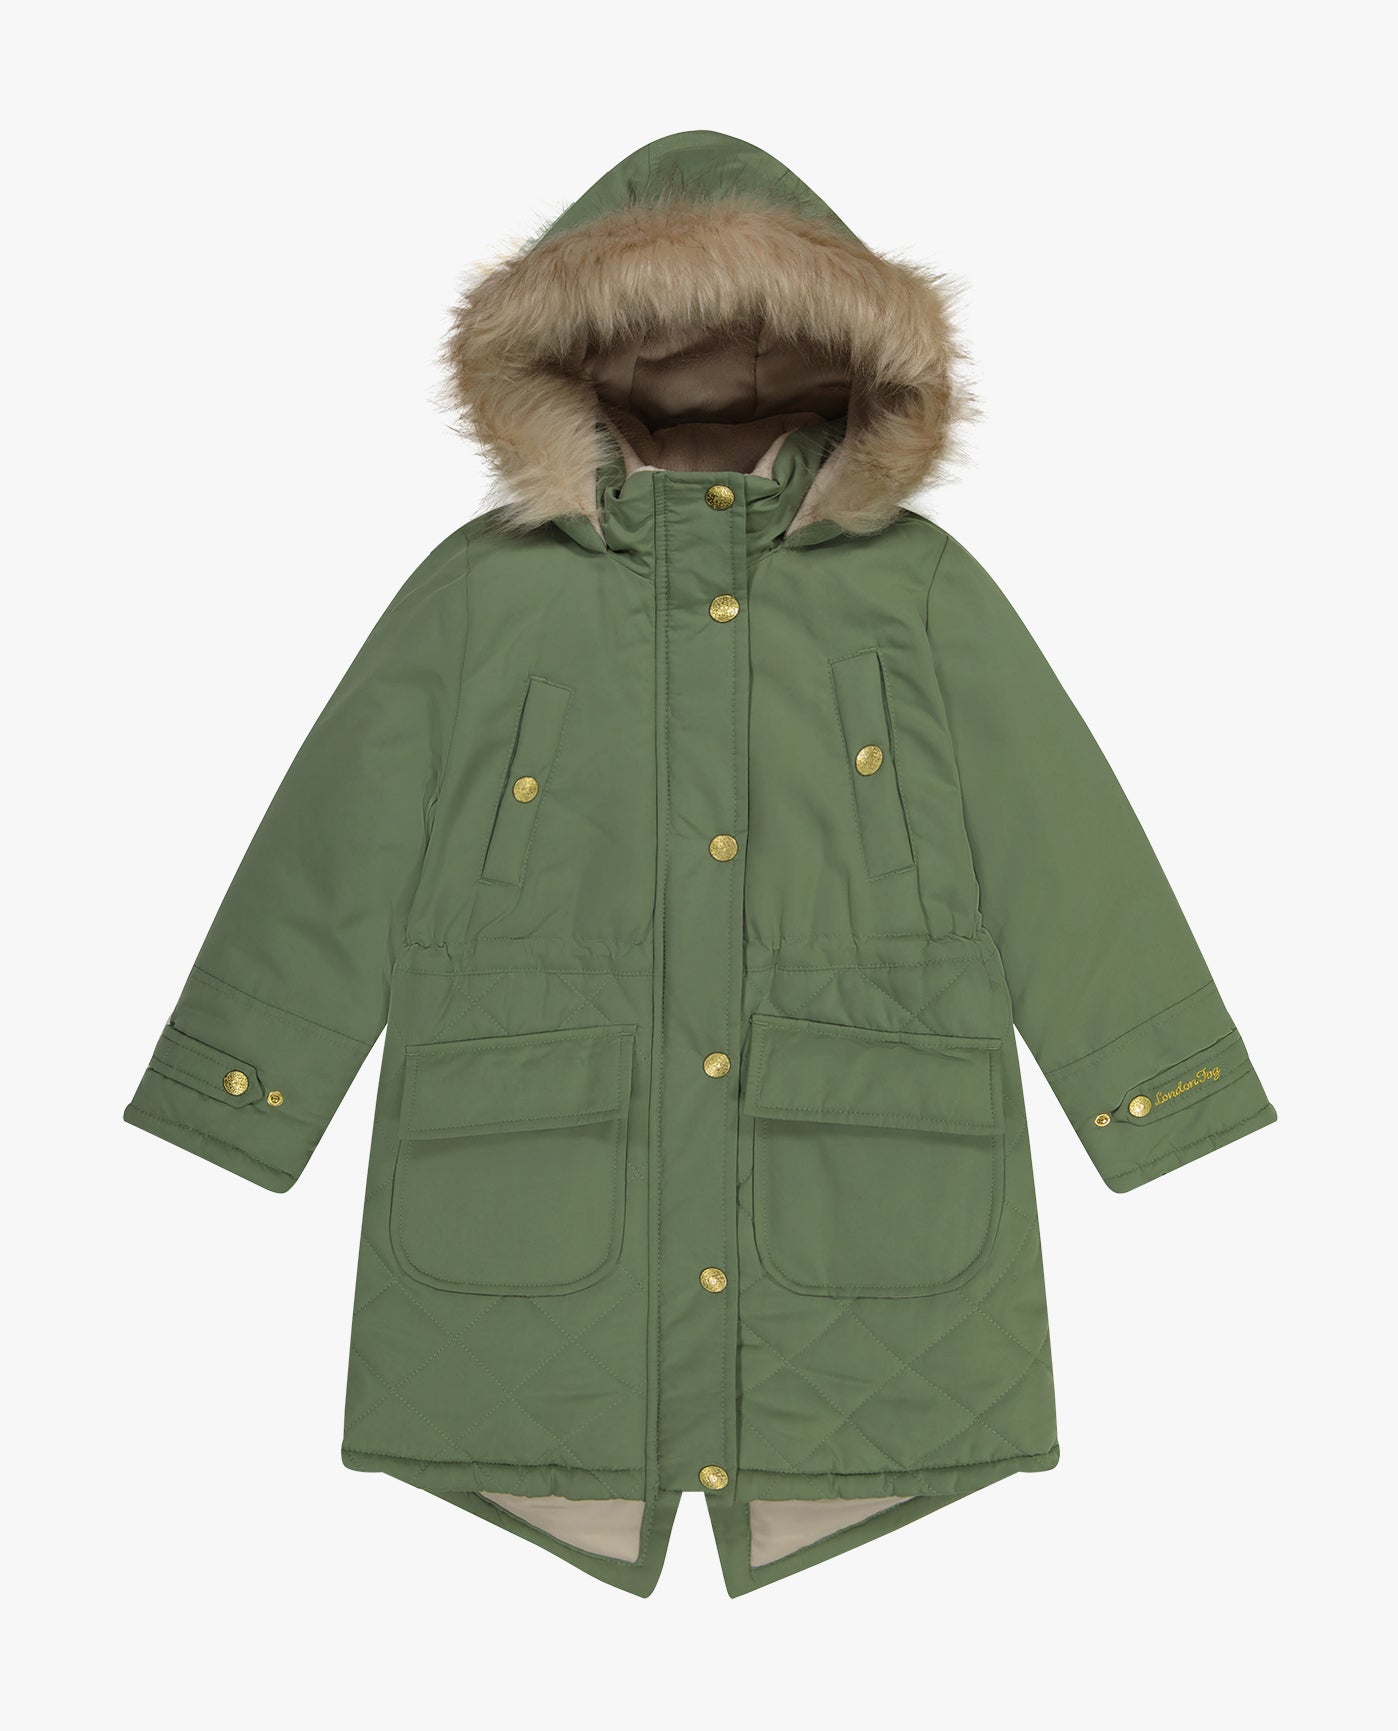 Detail View Of GIRLS ZIP-FRONT MID CINCH QUILTED PARKA WITH FUR TRIMMED HOOD | OLIVE